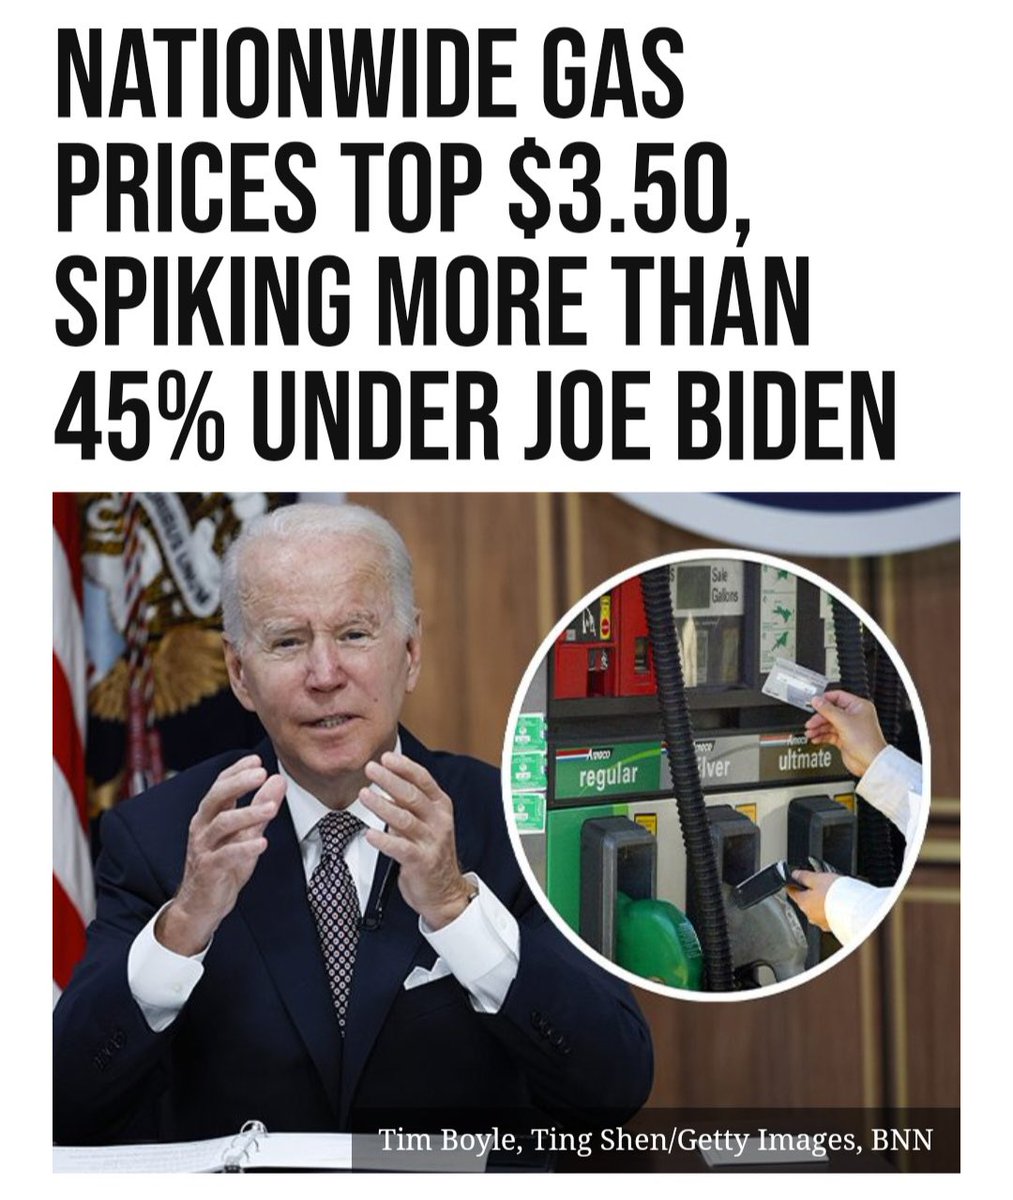 Biden’s war on energy has hung everyday Americans out to dry. We must put hard-working families first, not Green New Deal extremists!